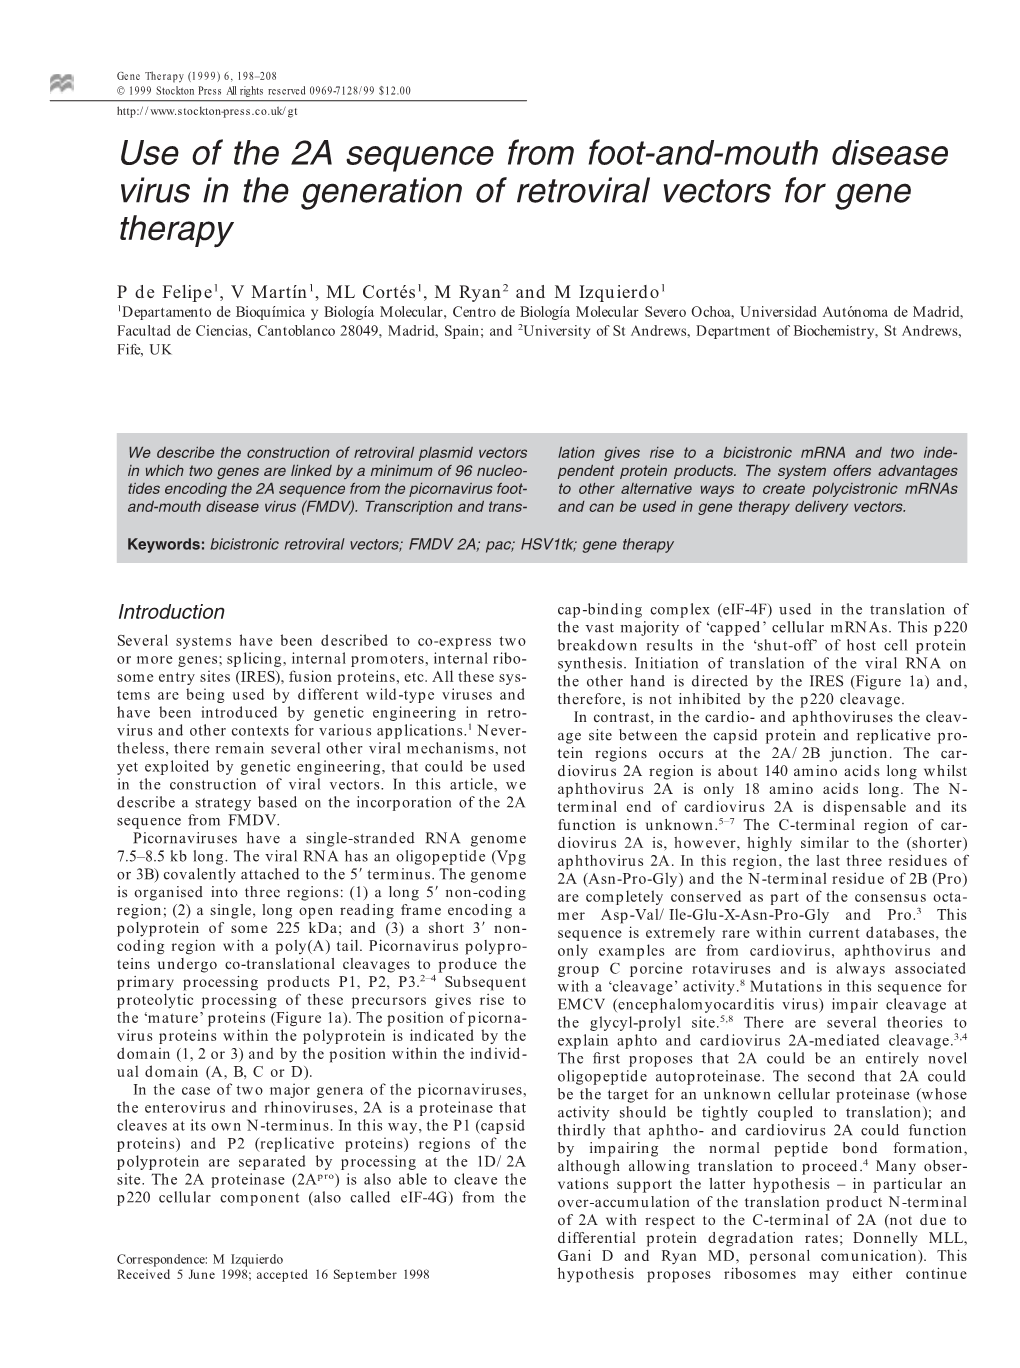 Use of the 2A Sequence from Foot-And-Mouth Disease Virus in the Generation of Retroviral Vectors for Gene Therapy